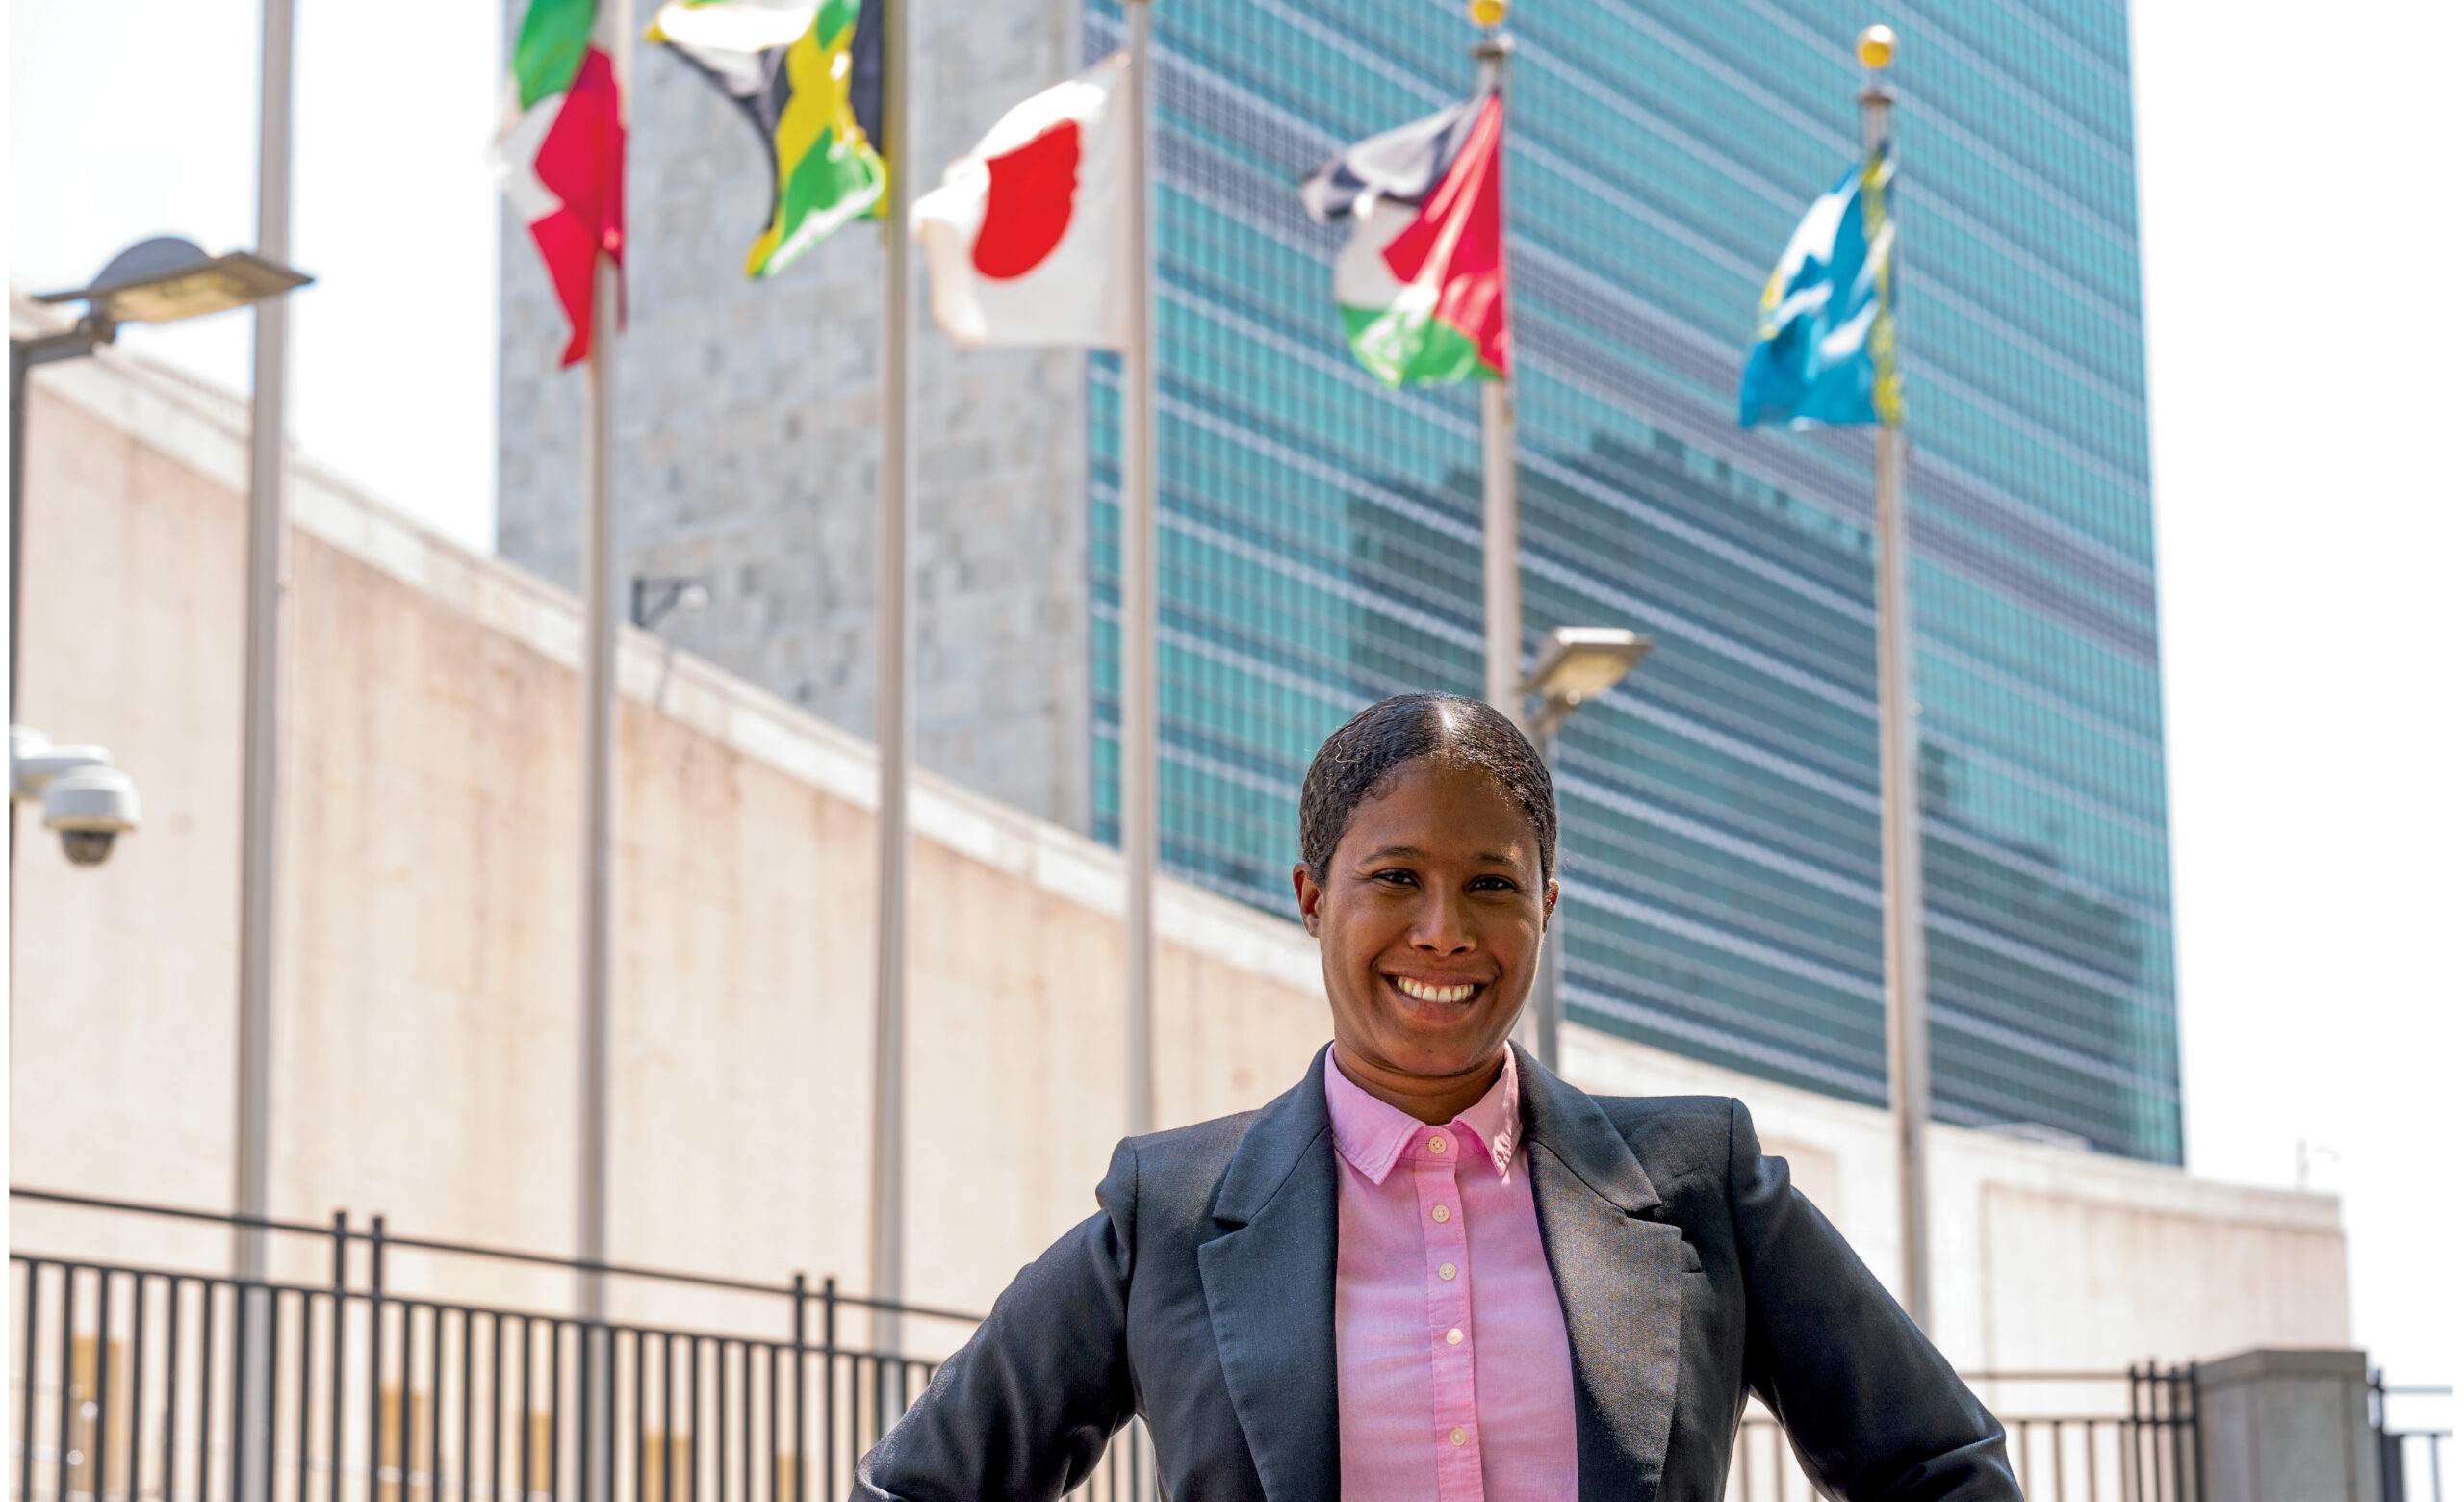 Malene Alleyne is a Jamaican lawyer and activist hoping to change the way the international community views development in the Caribbean region.